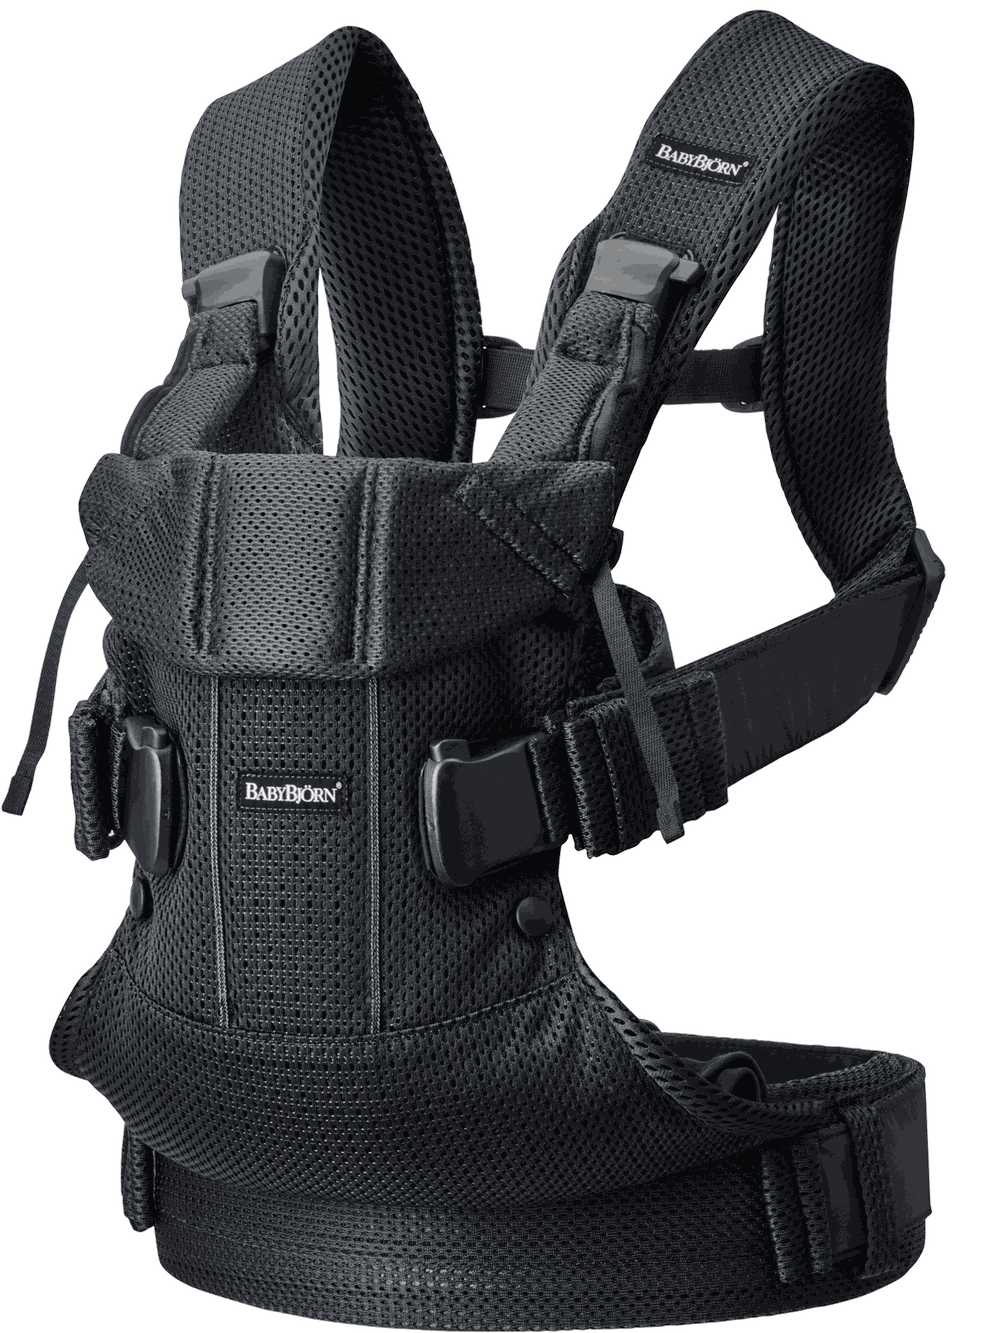 BabyBjorn Baby Carrier One Air, 3D Mesh, Black - image 1 of 2